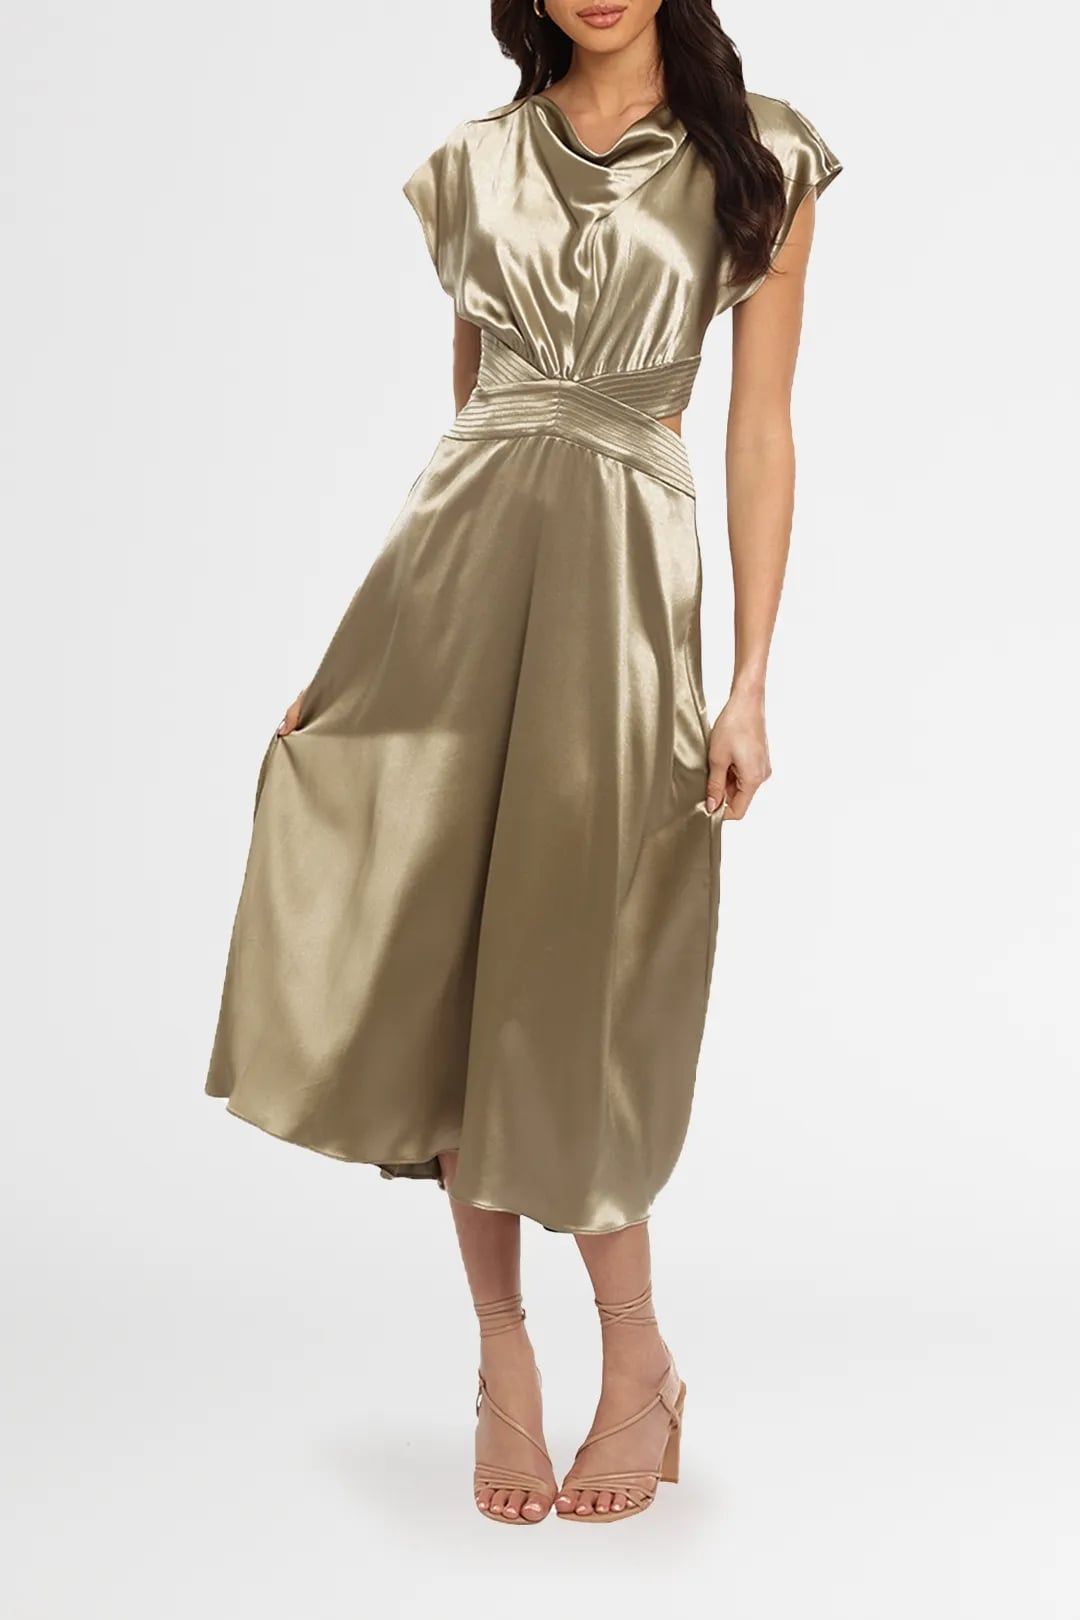 Hire Plympton dress in khaki for cocktail events.